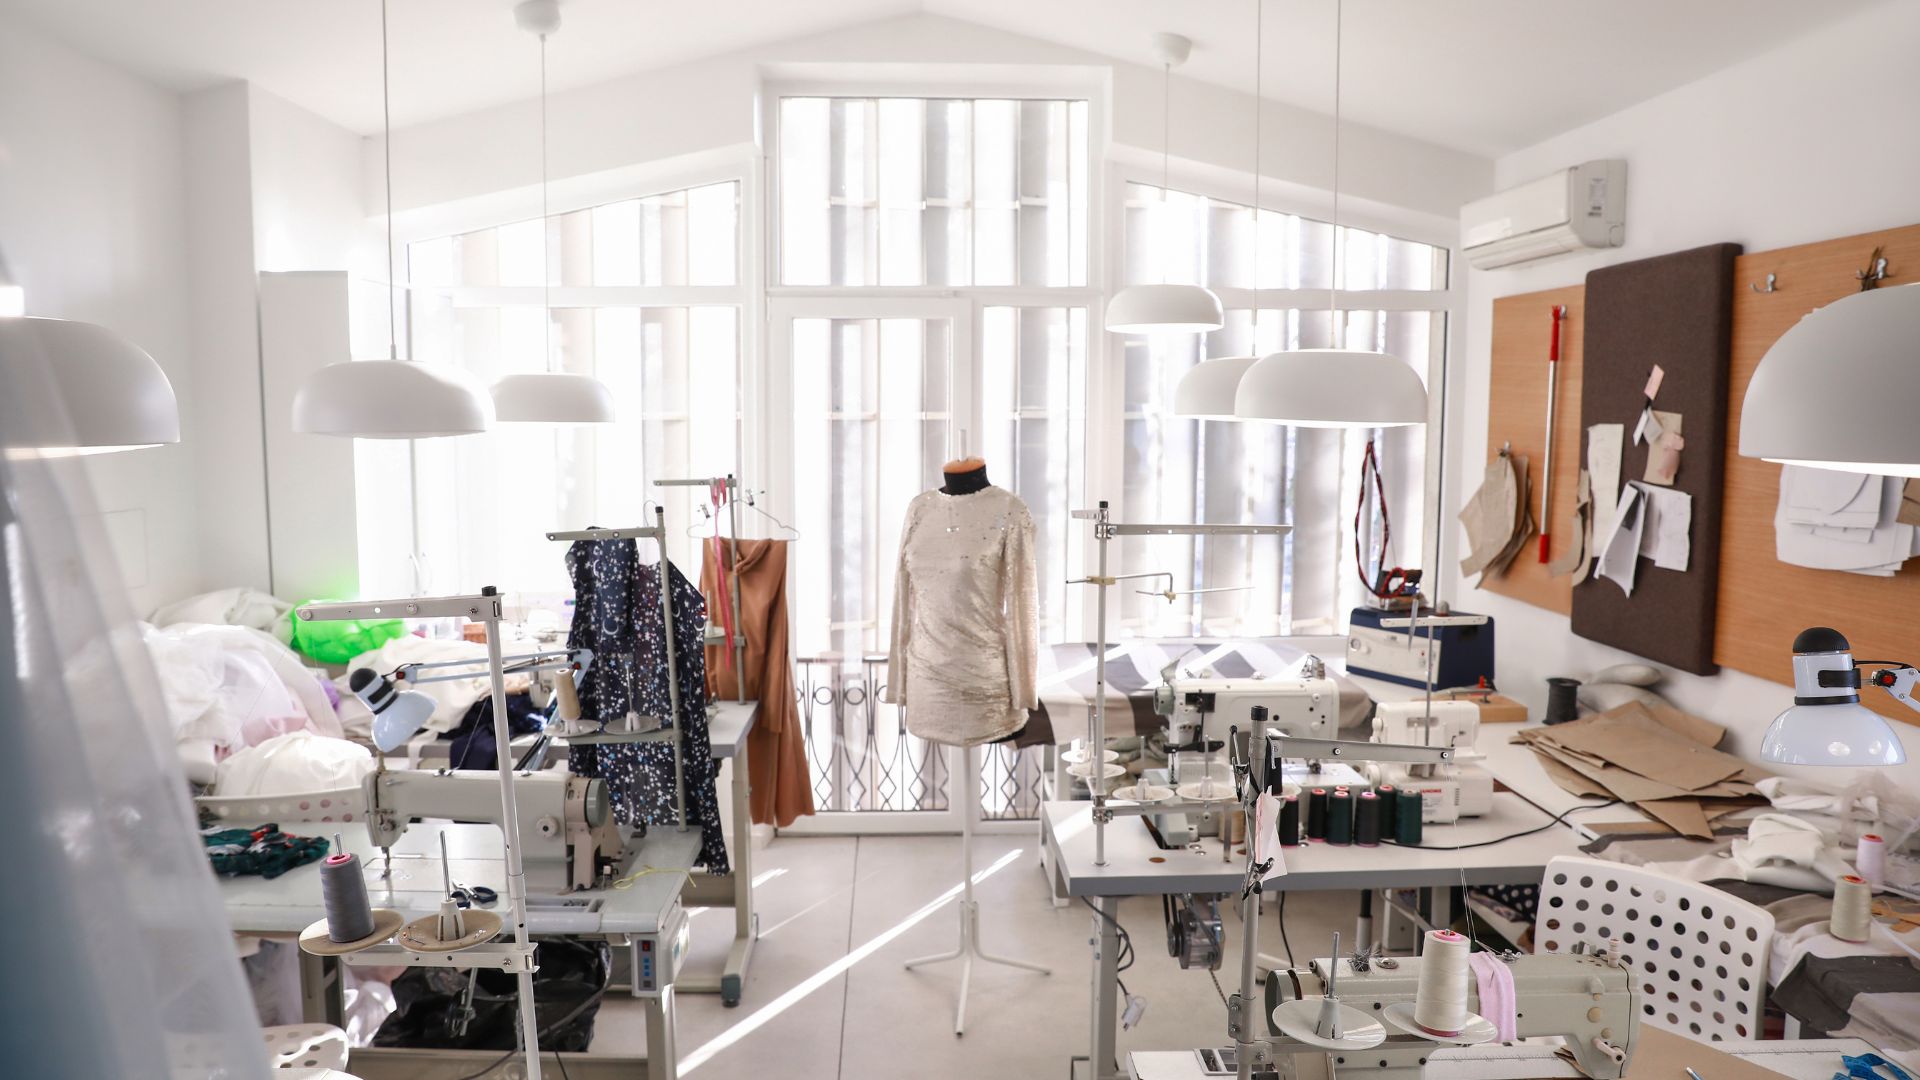 A well-lit apparel manufacturing workspace with sewing machines, fabric rolls, and a mannequin displaying a garment.